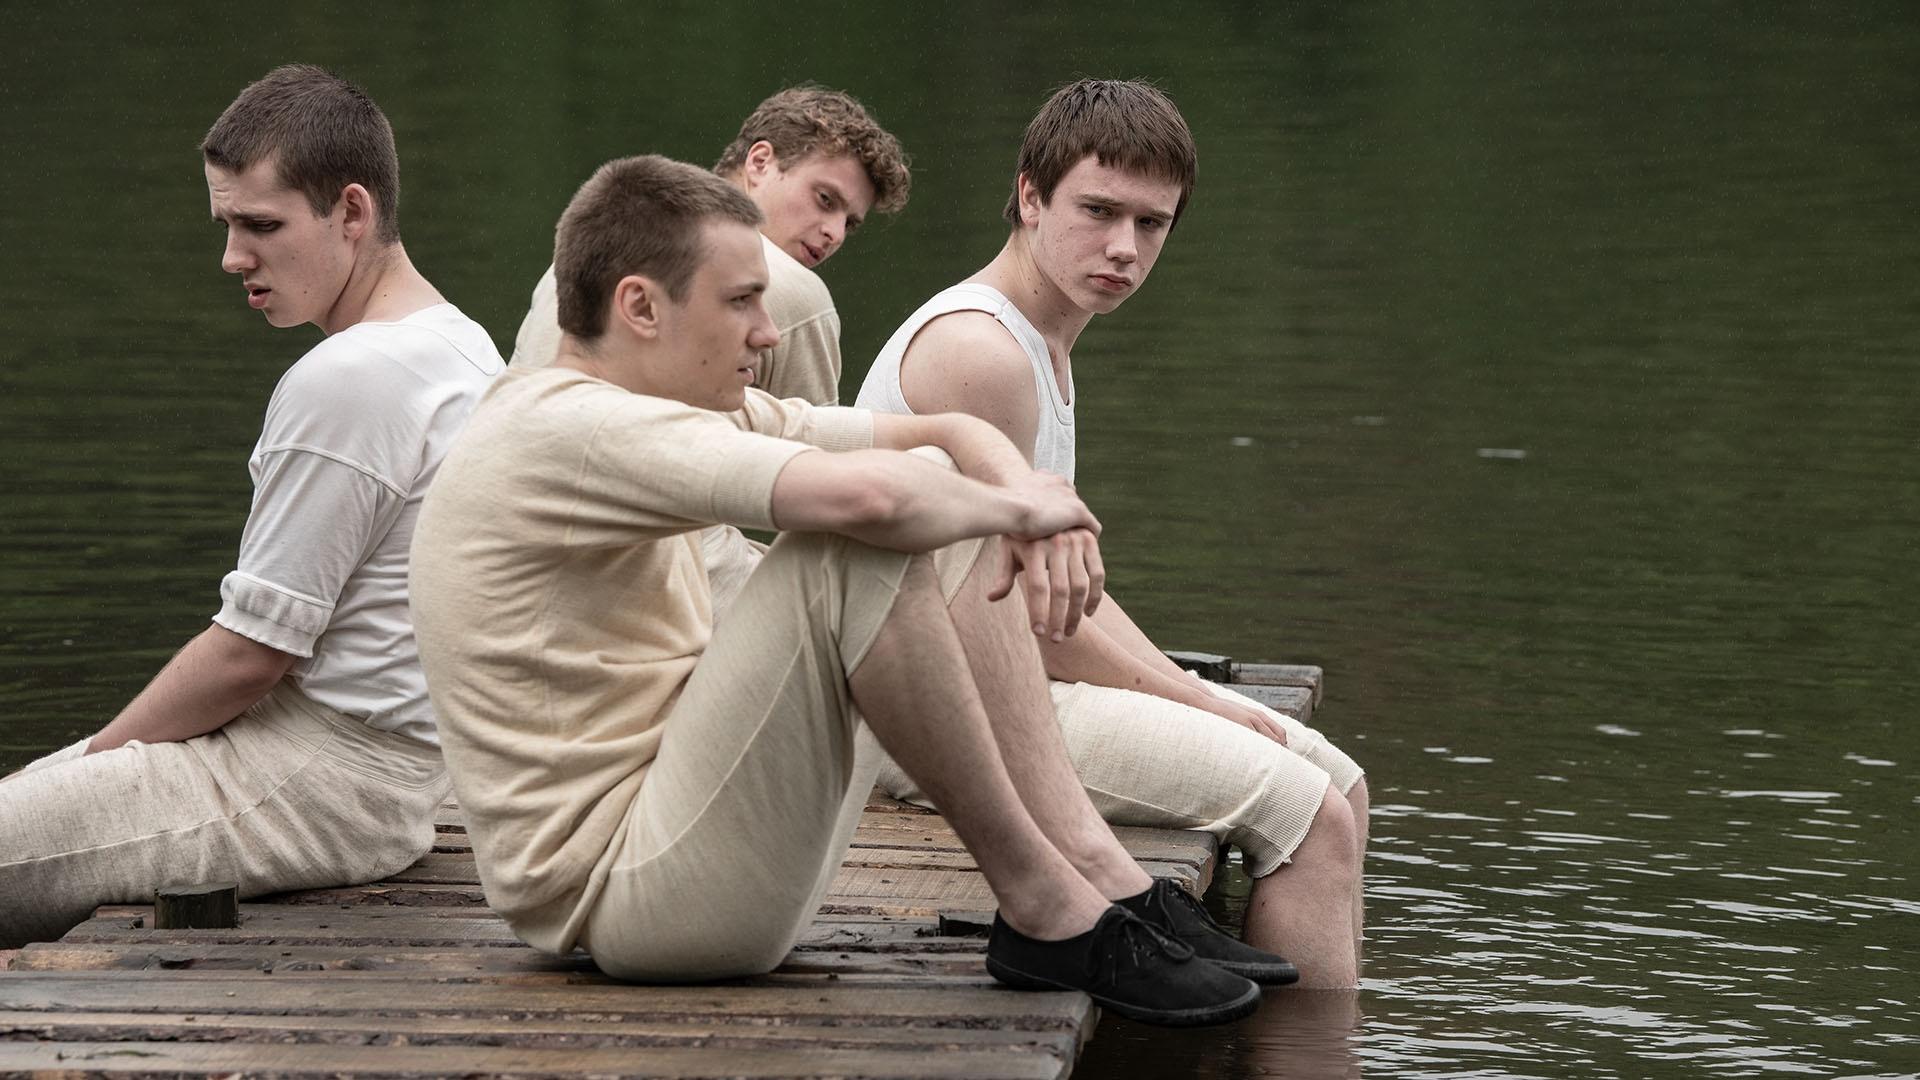 Four young boys sitting on a dock.